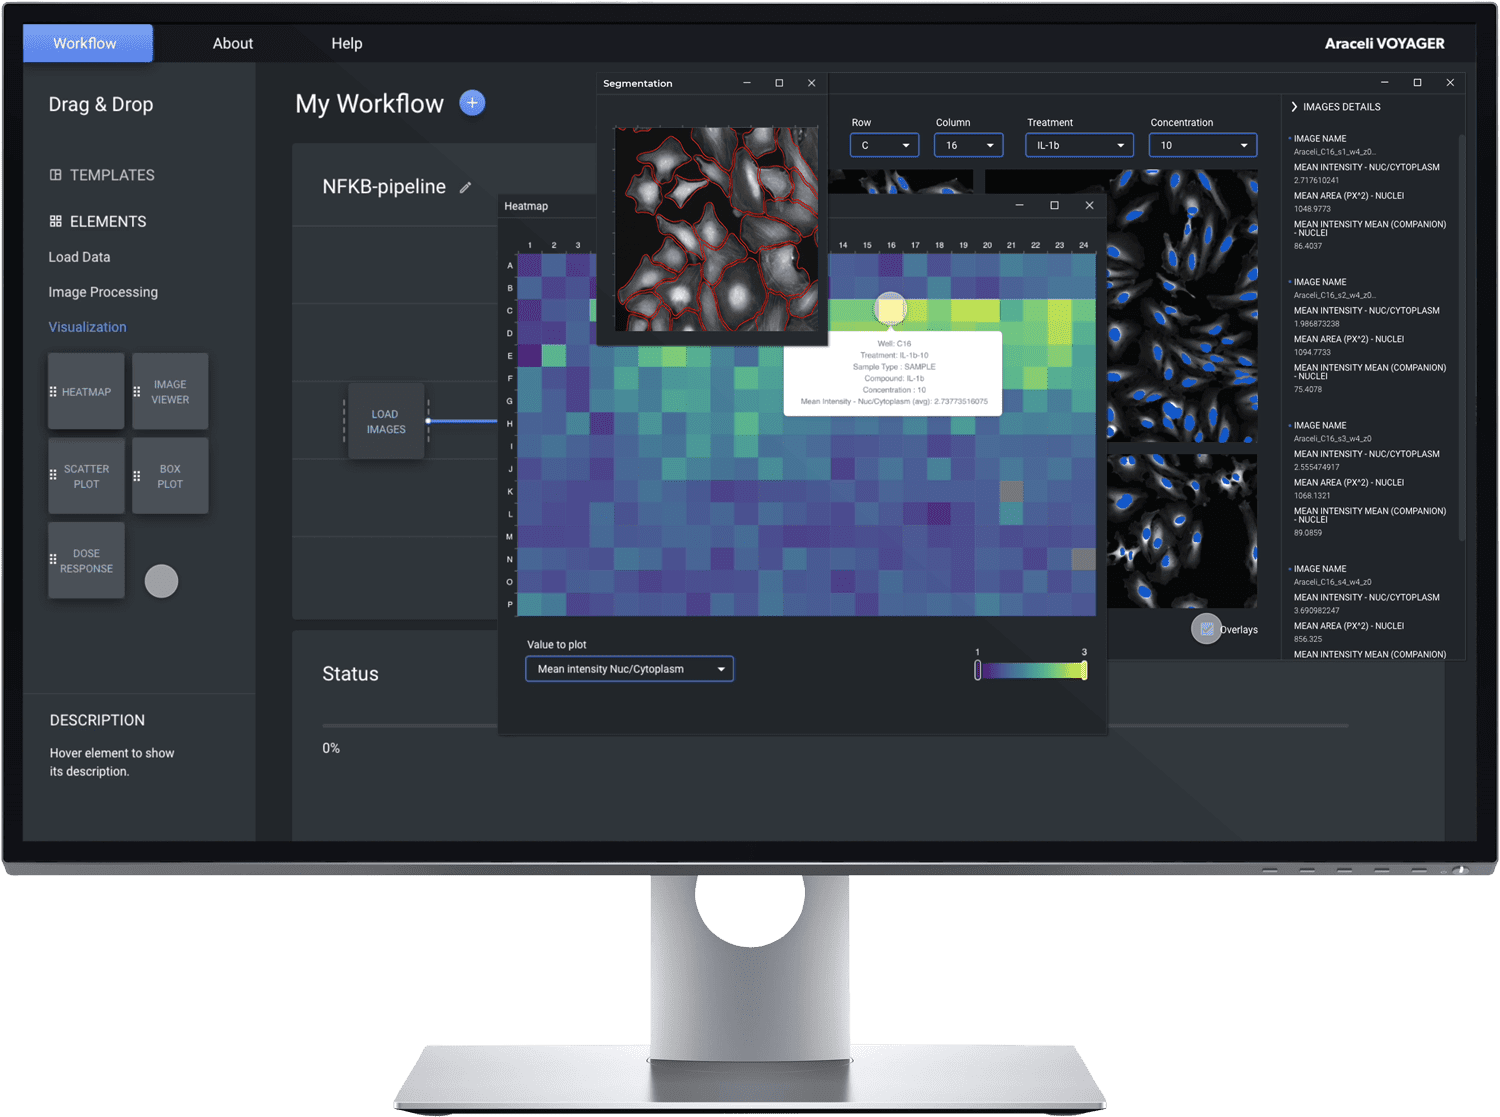 High-tech monitor with displaying the Voyager software: cell segmentation, heatmap, and image comparison, and workflow visualizations, as well as drag and drop functions.